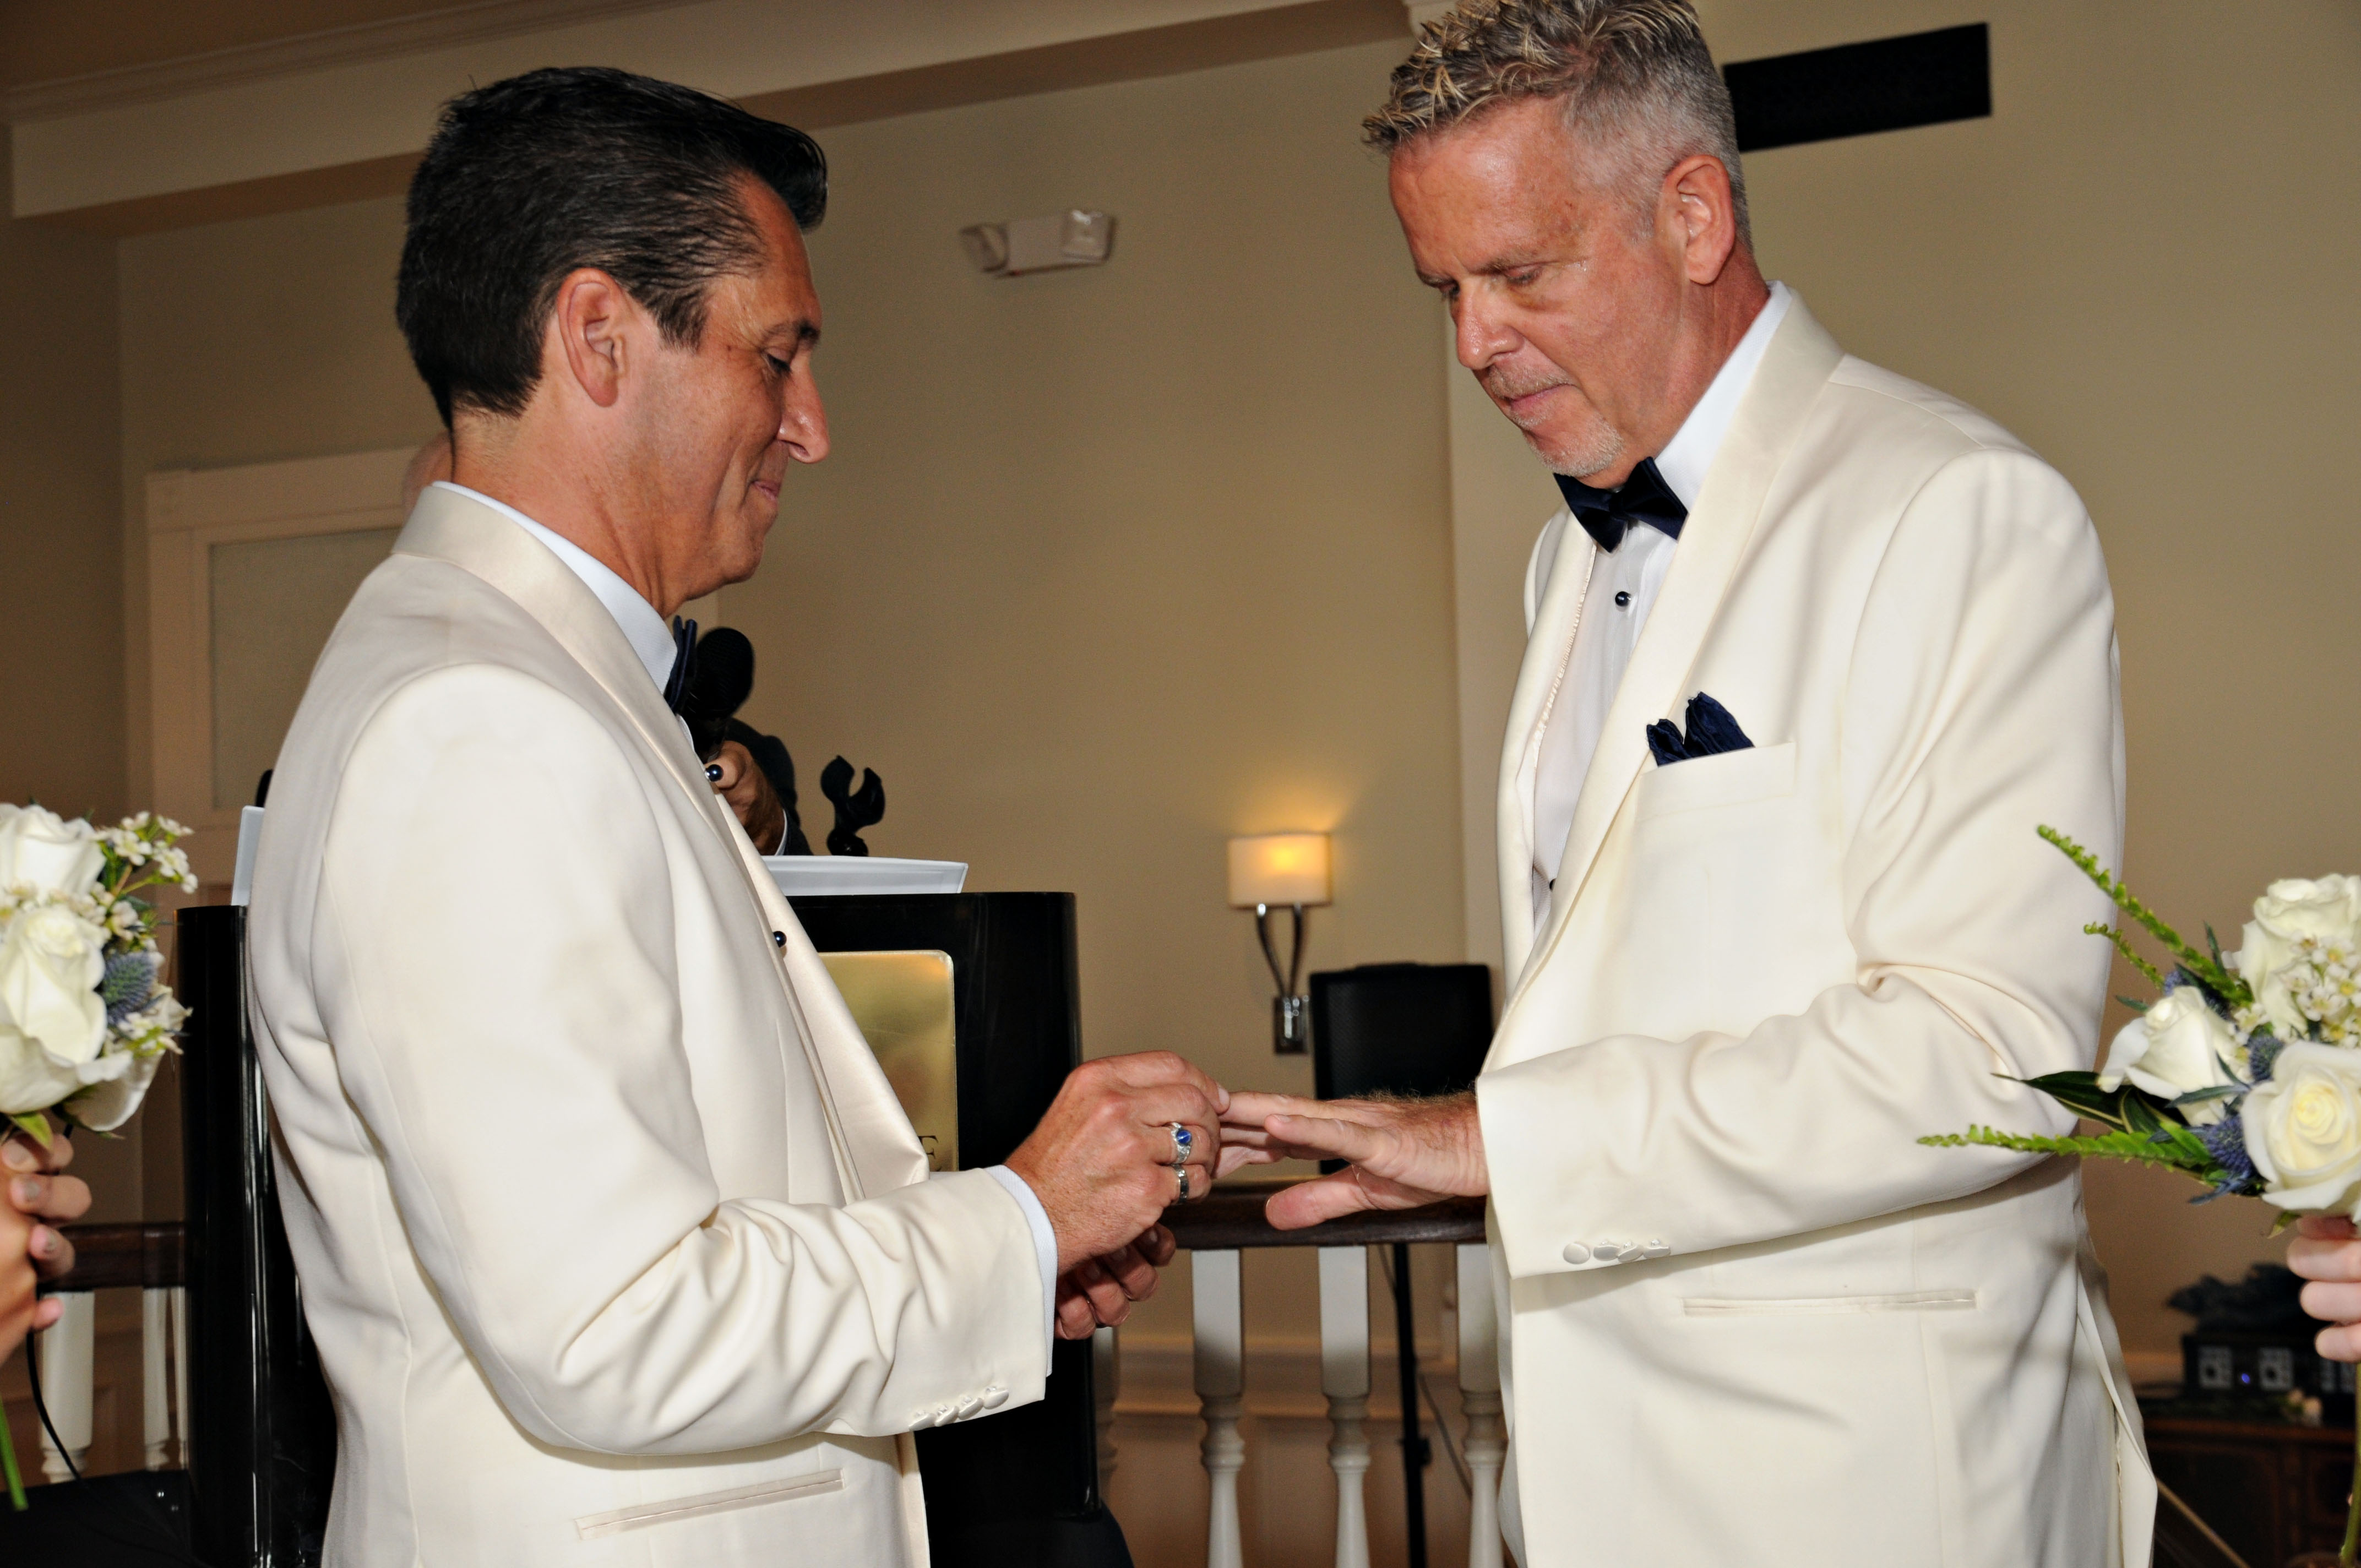 A groom and groom exchange wedding bands at their classic ceremony at The Tremont House Hotel in Galveston, TX.